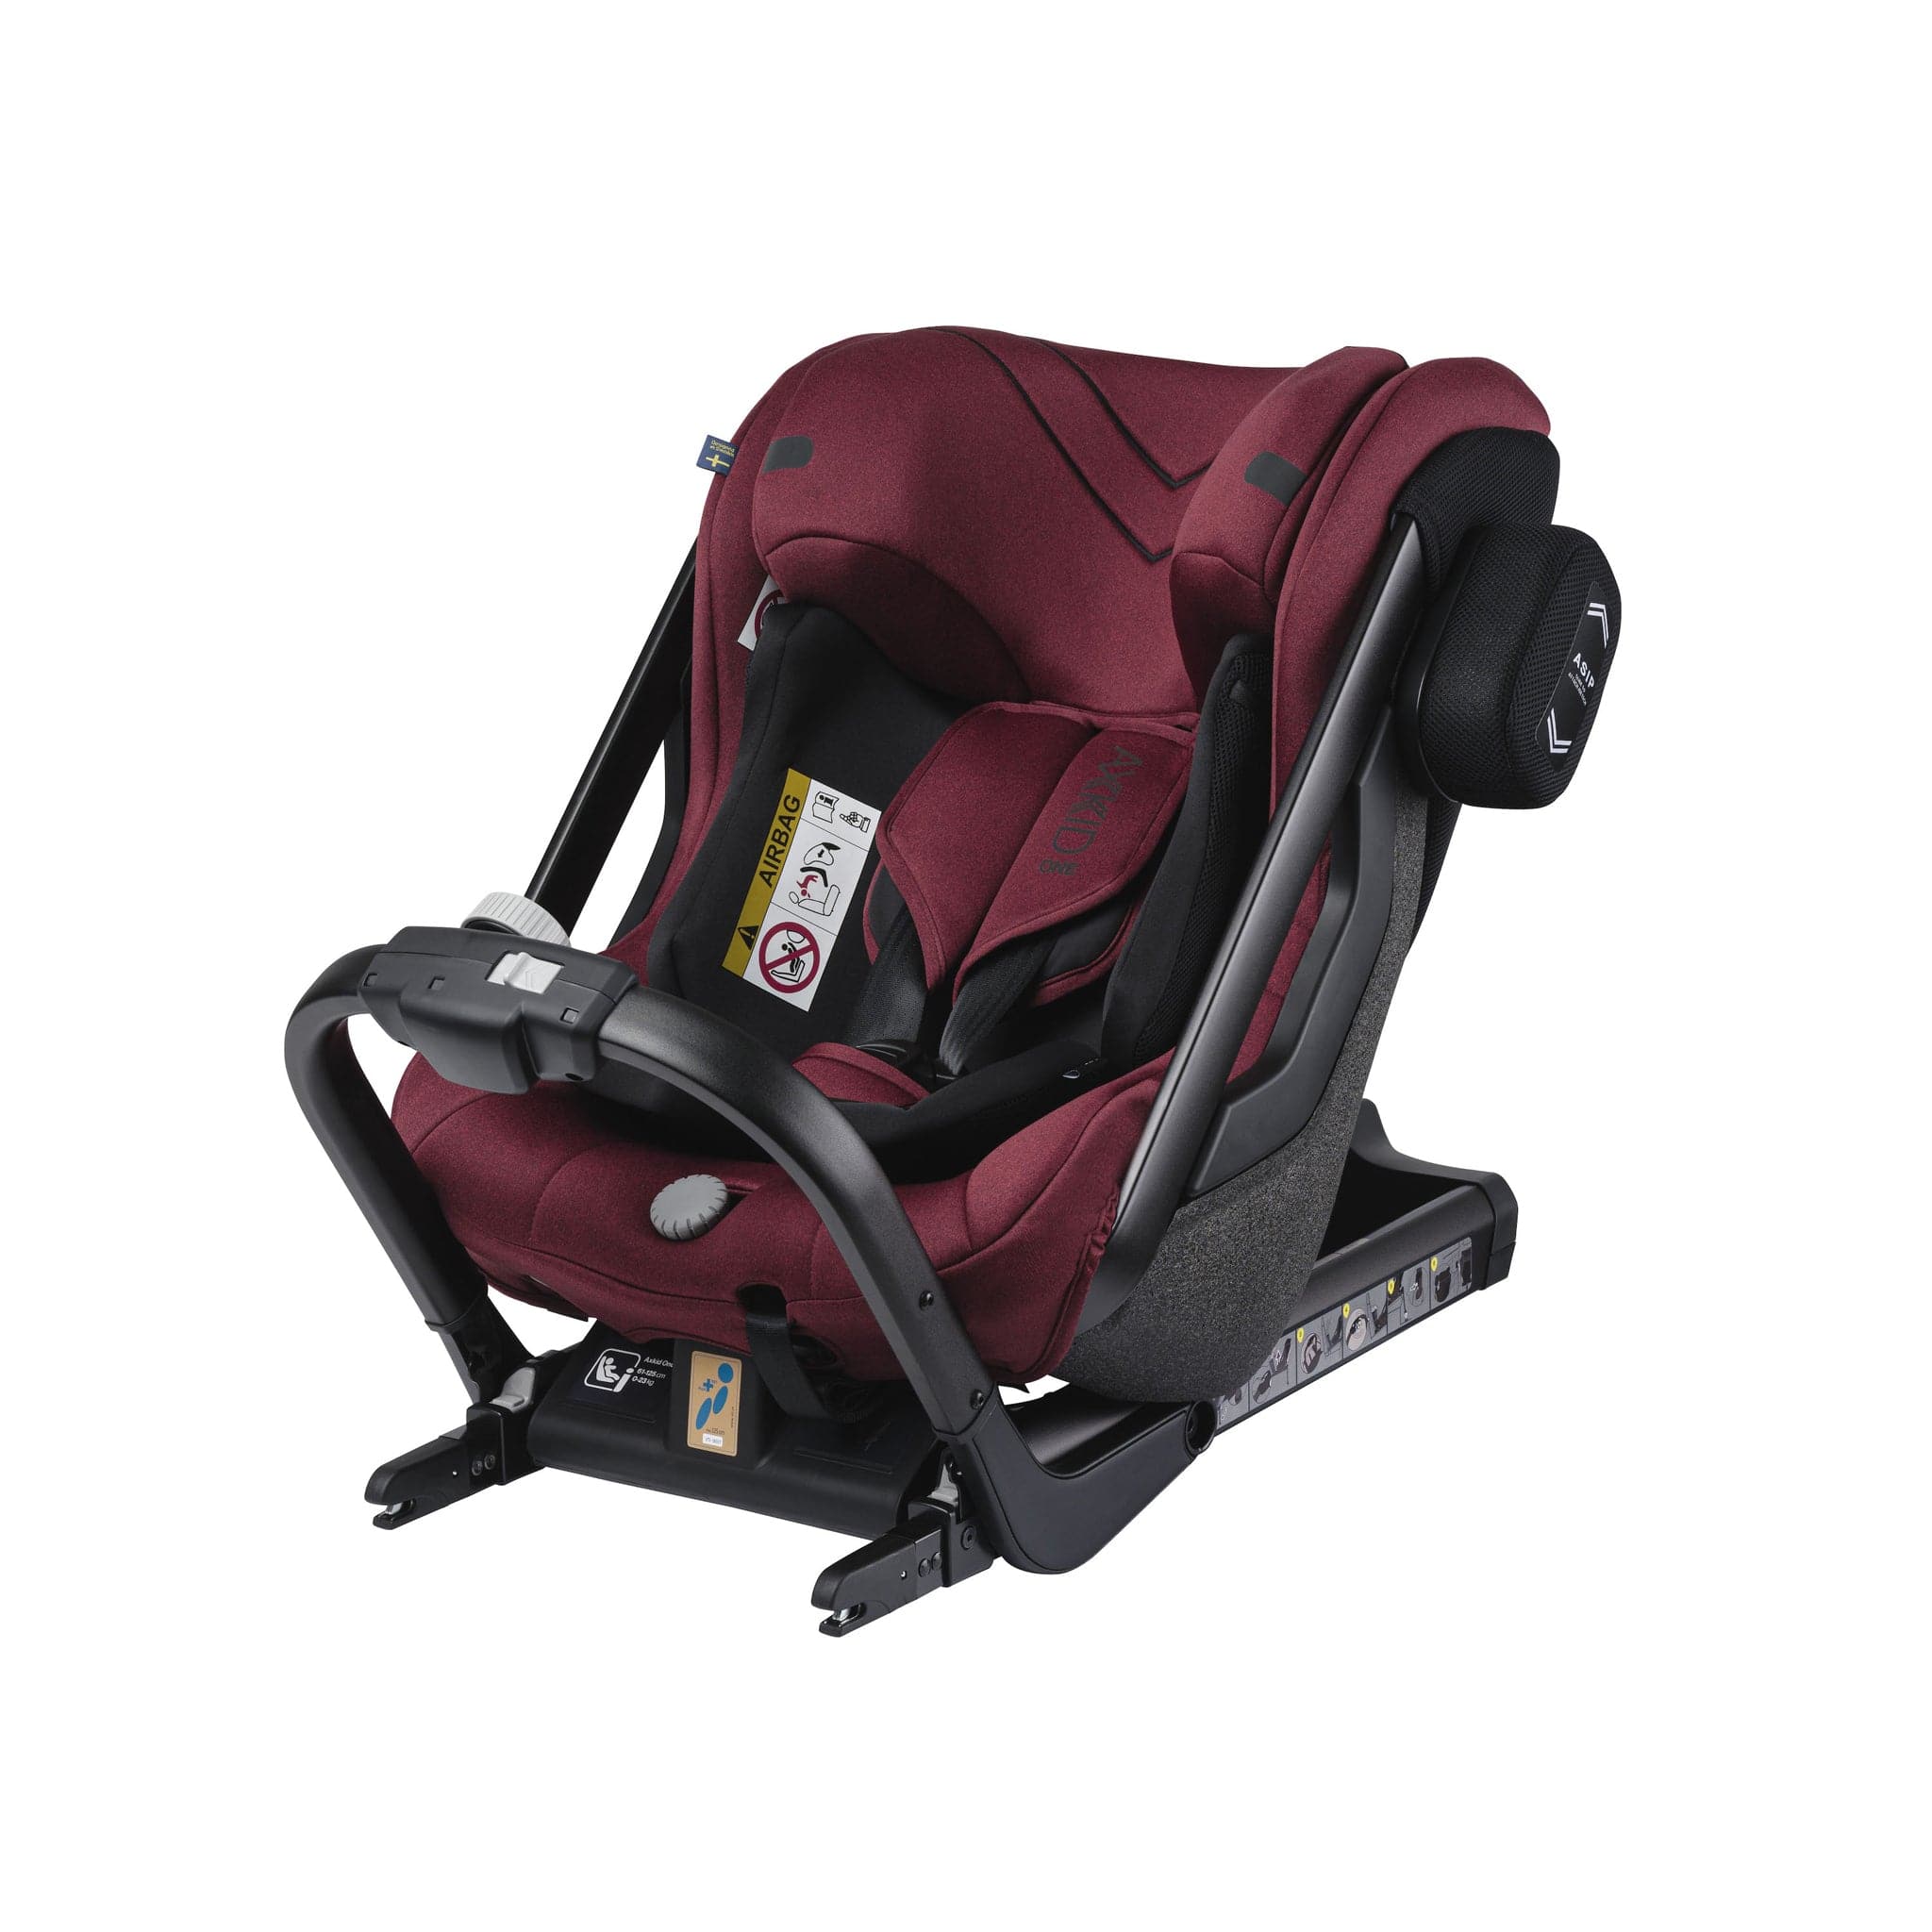 Axkid One 2 - Tile Melange Extended Rear Facing Car Seats 25110125 7350057586679